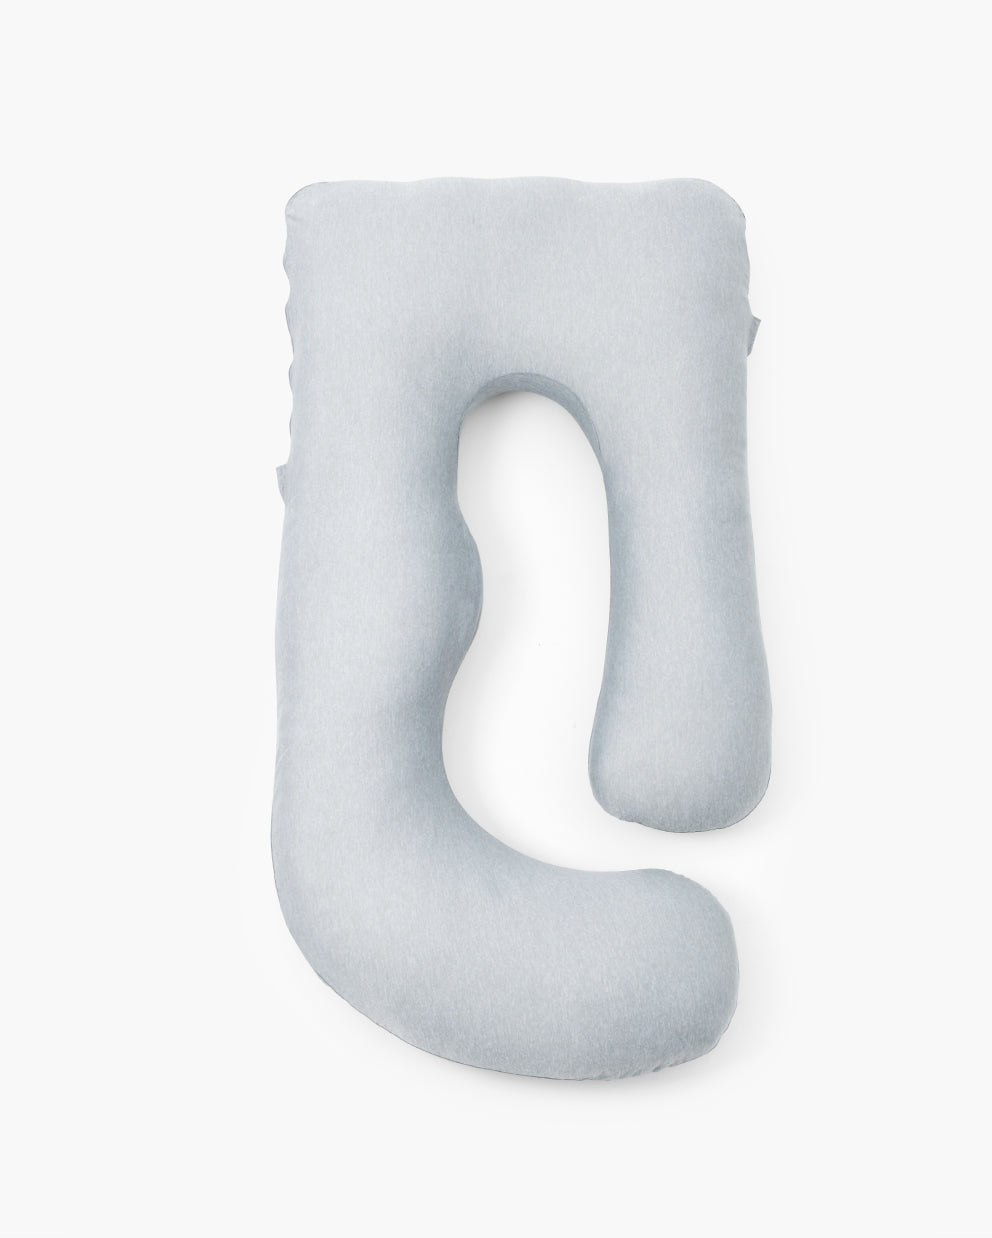 Huggable - Our Maternity Body Pillow Supportive Body Pillow